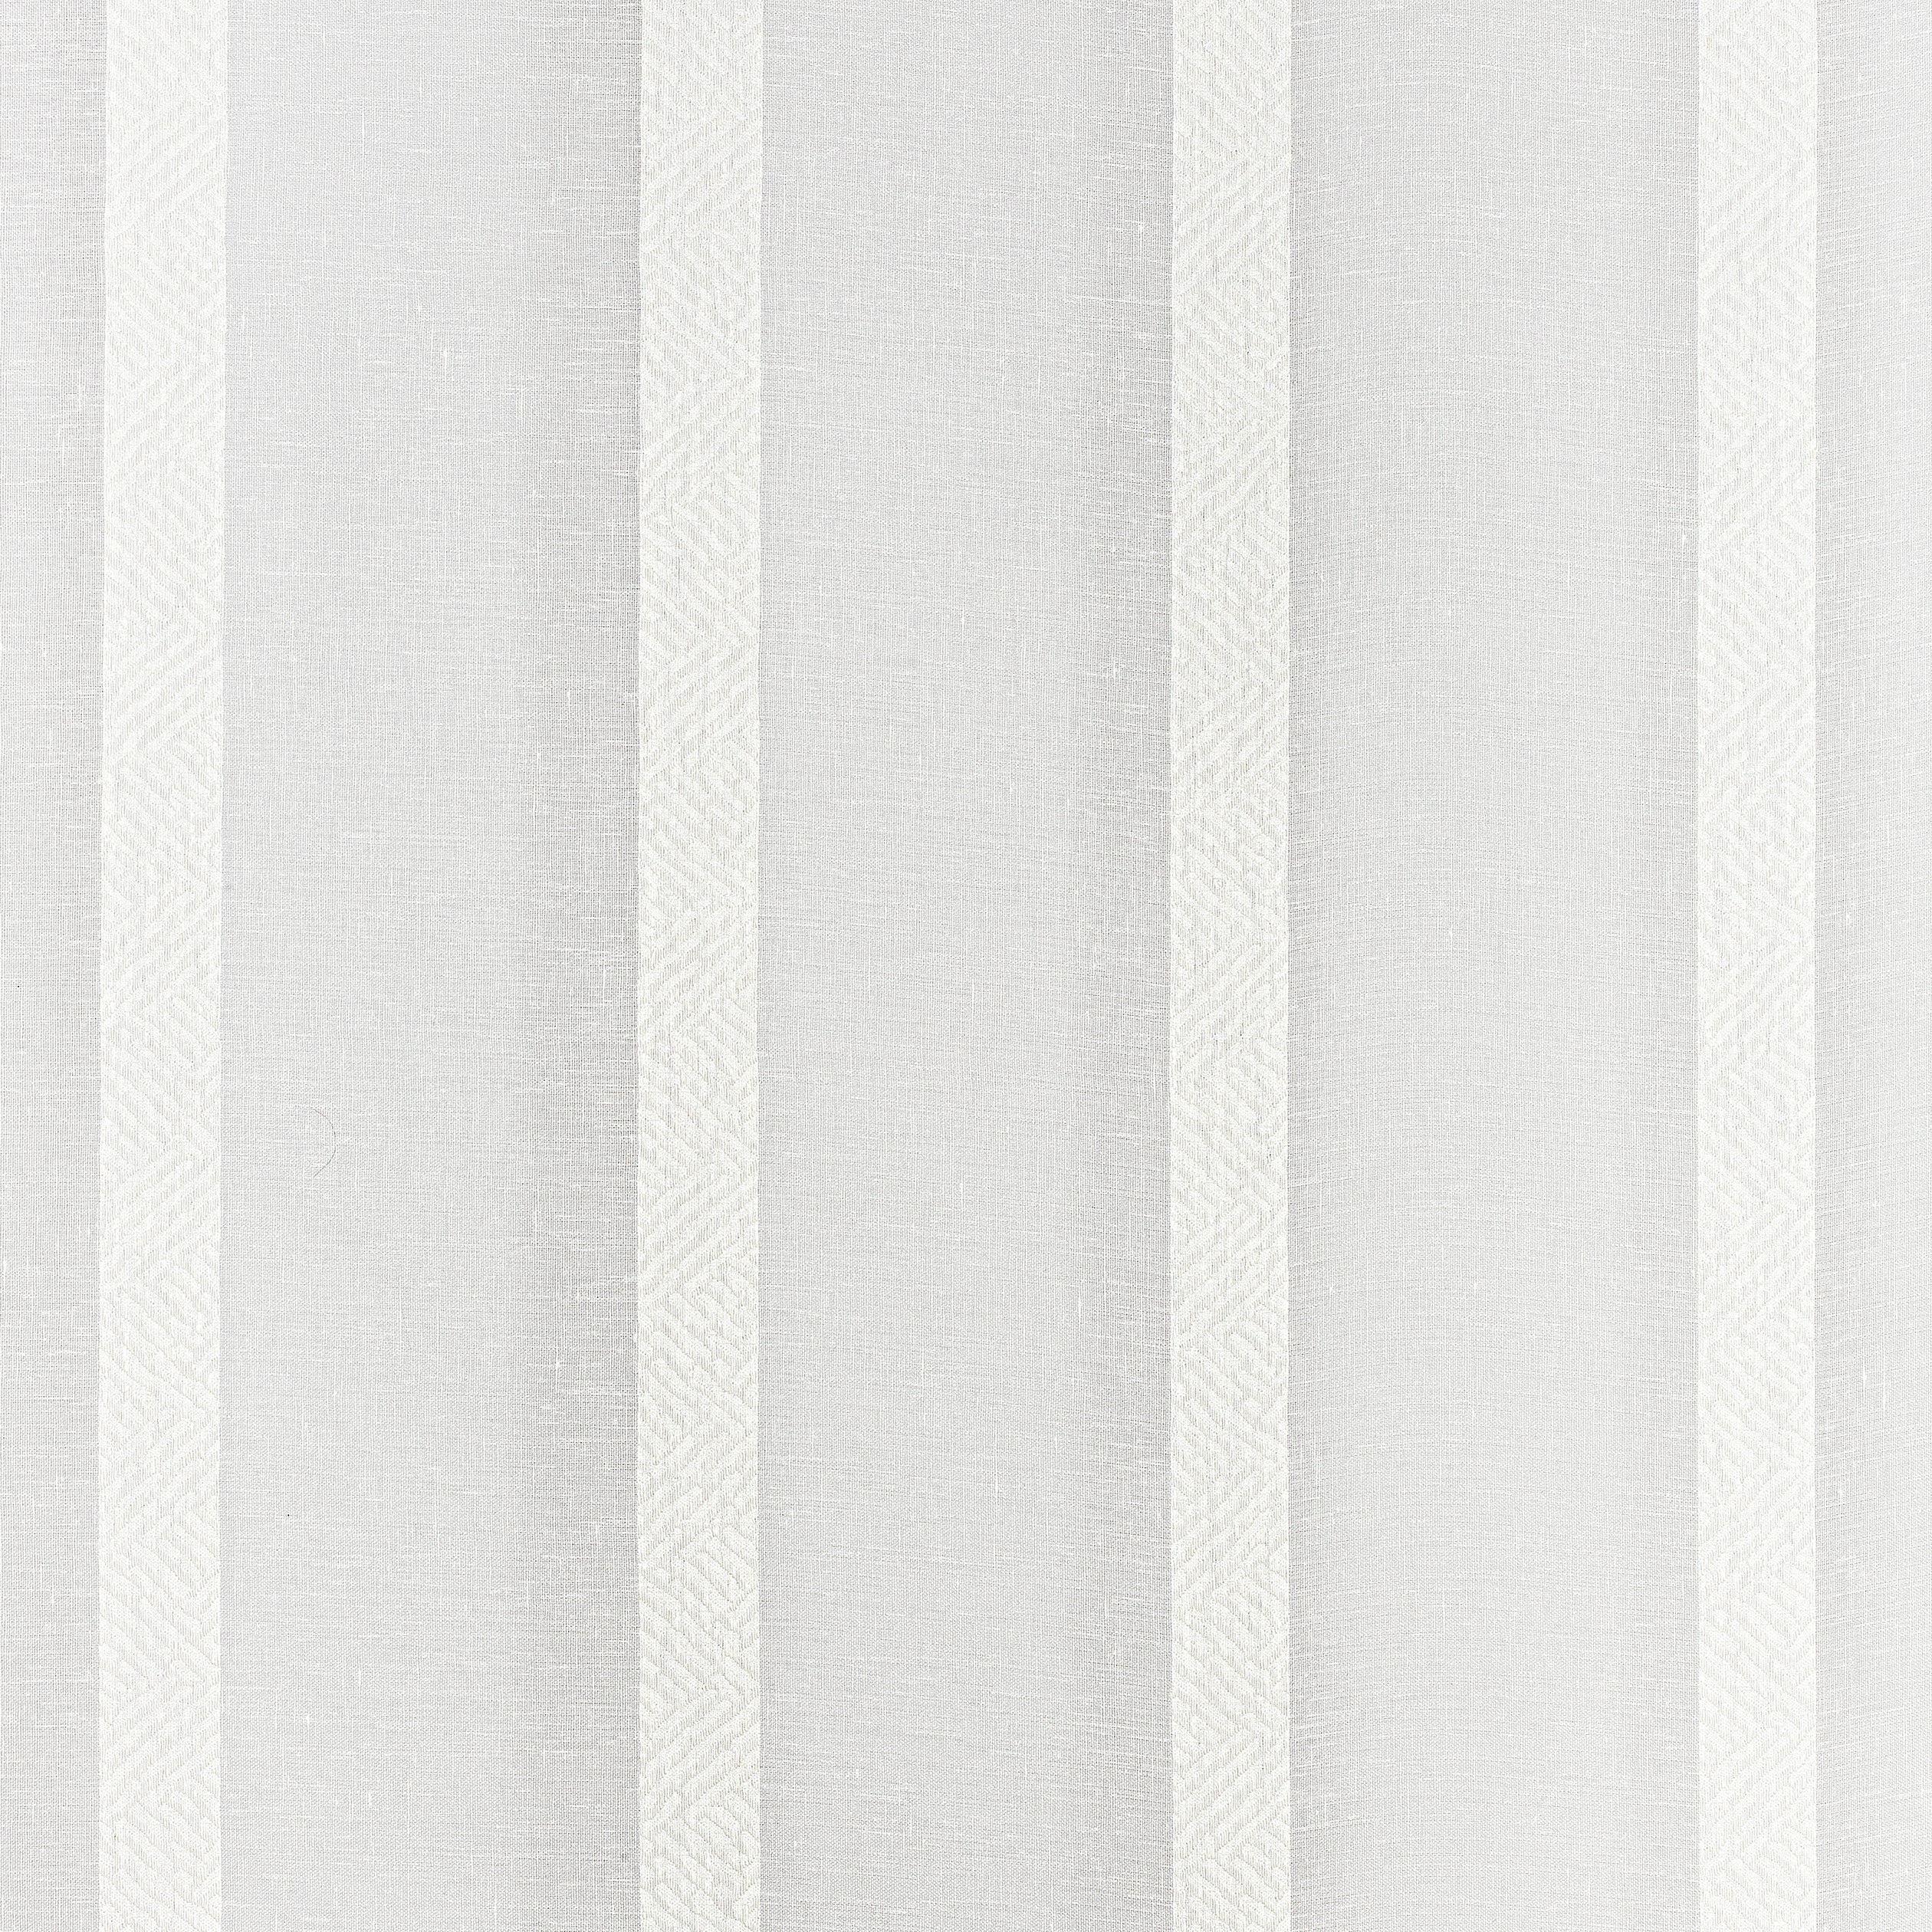 Cobble Hill Stripe fabric in ivory color - pattern number FWW7123 - by Thibaut in the Atmosphere collection